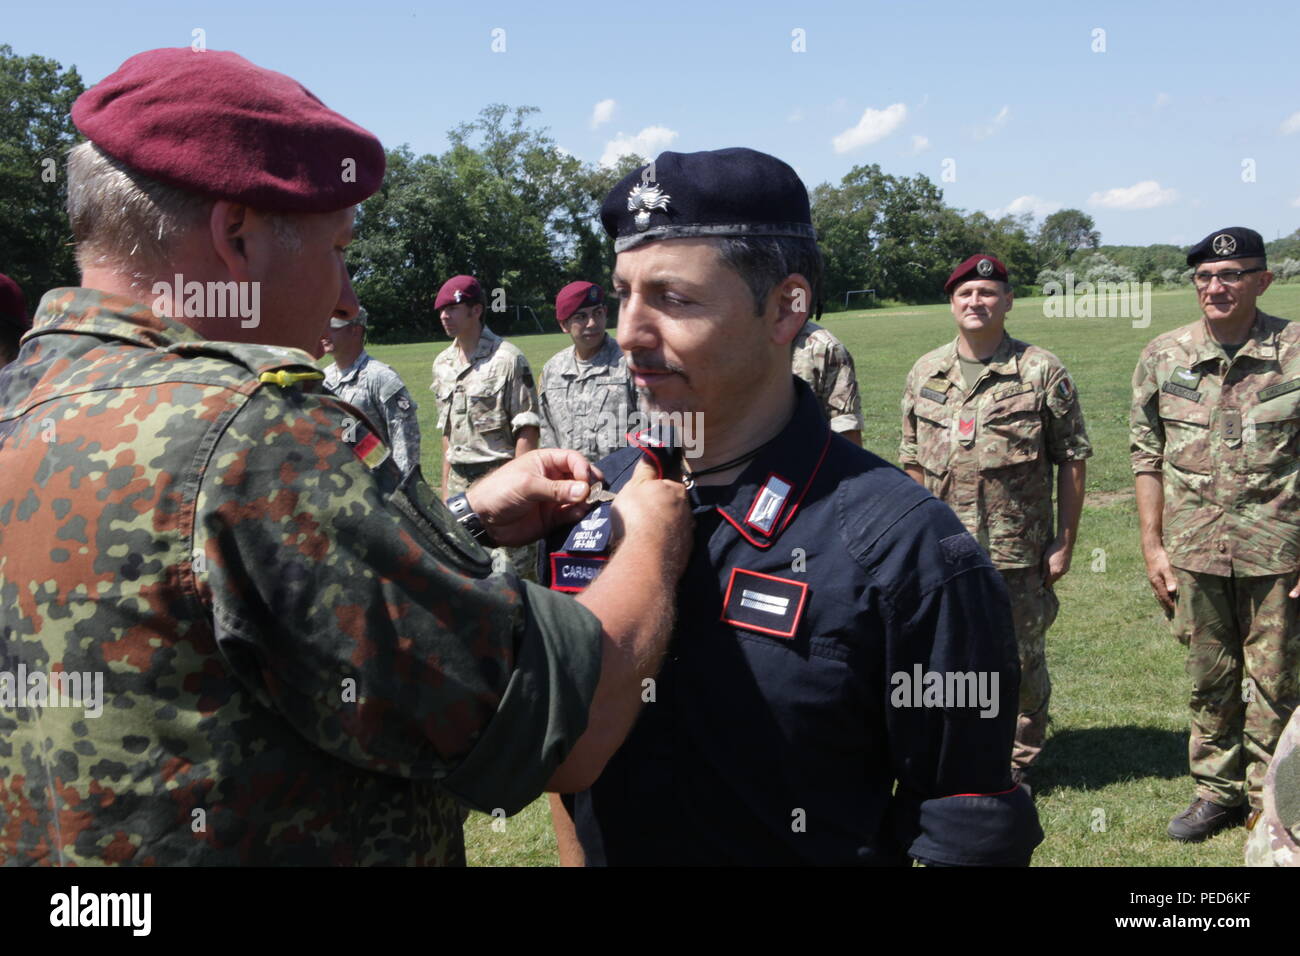 A German Jumpmaster pins German wings on an Italian Carabinieri paratrooper, during the wing exchange ceremony for completing a jump with a German jumpmaster, Aug. 3, 2015.  Leapfest is an International parachute competition hosted by the 56th Troop Command, Rhode Island National Guard to promote high level technical training and esprit de corps within the International Airborne community. (U.S. Army Photo by Sgt. 1st Class Horace Murray/Released) Stock Photo